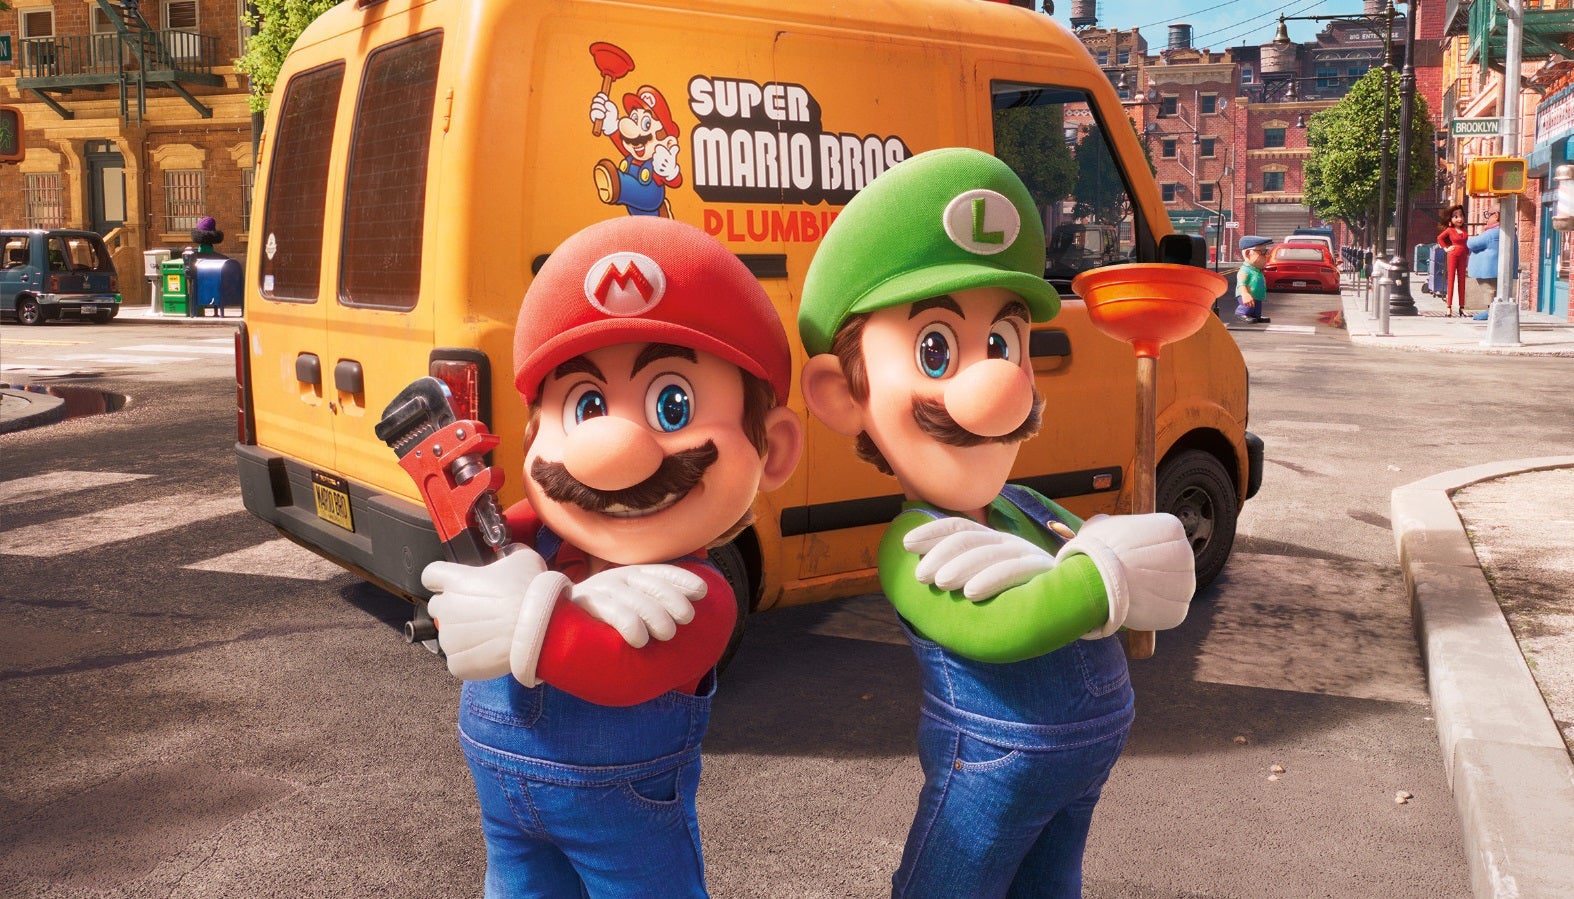 The Super Mario Bros. Trailer Brings Gaming’s Most Iconic Duo to the Silver Screen